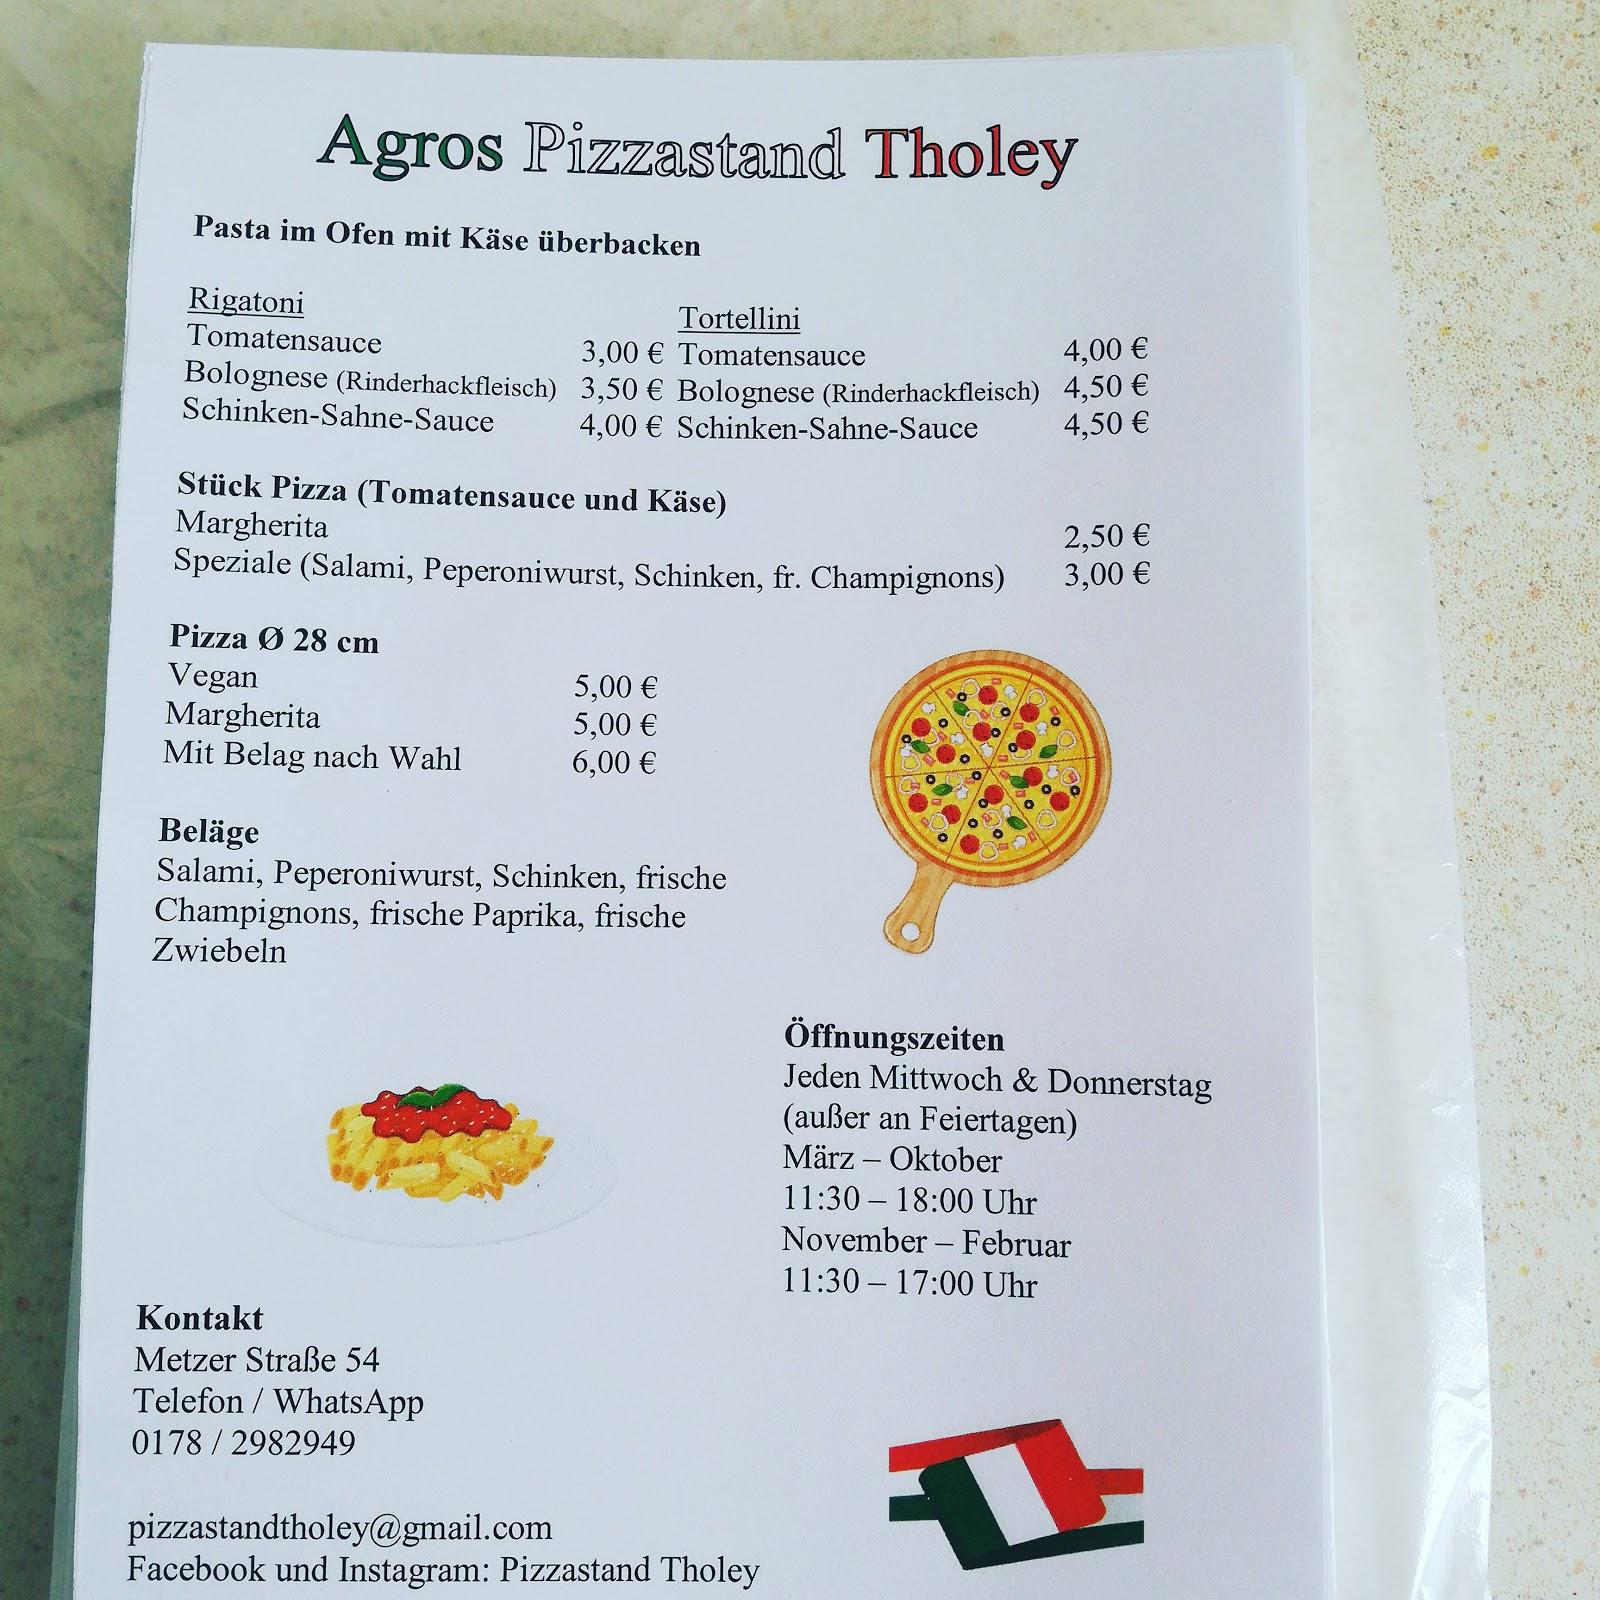 Restaurant "Agros Pizzastand" in  Tholey